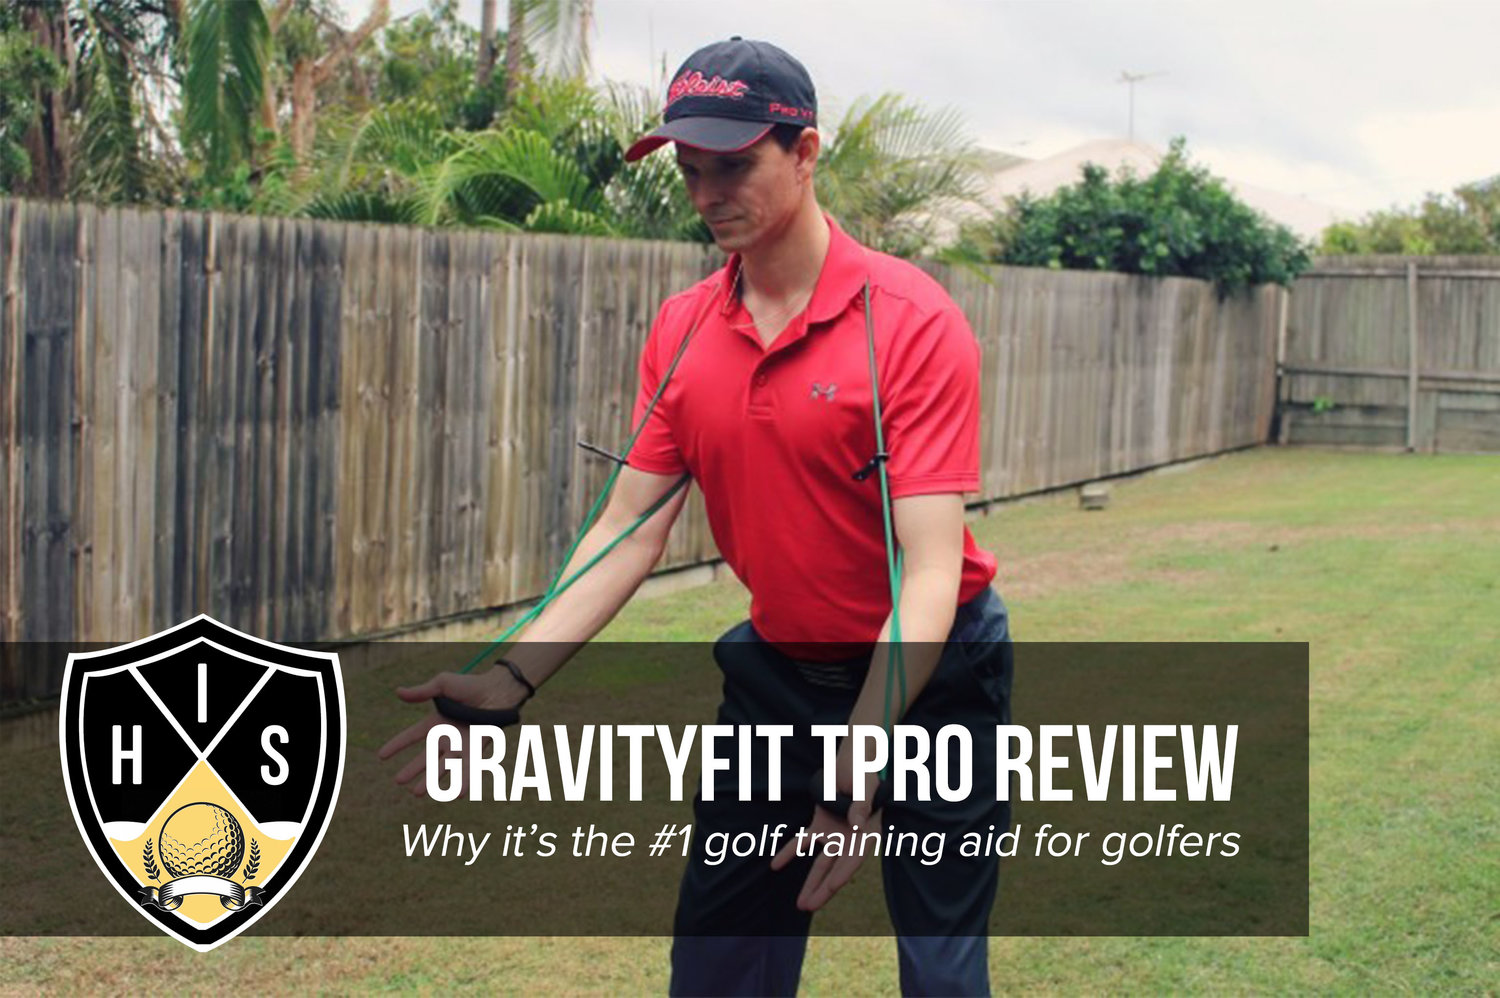 GravityFit TPro Review: Why It's The #1 Golf Training Aid